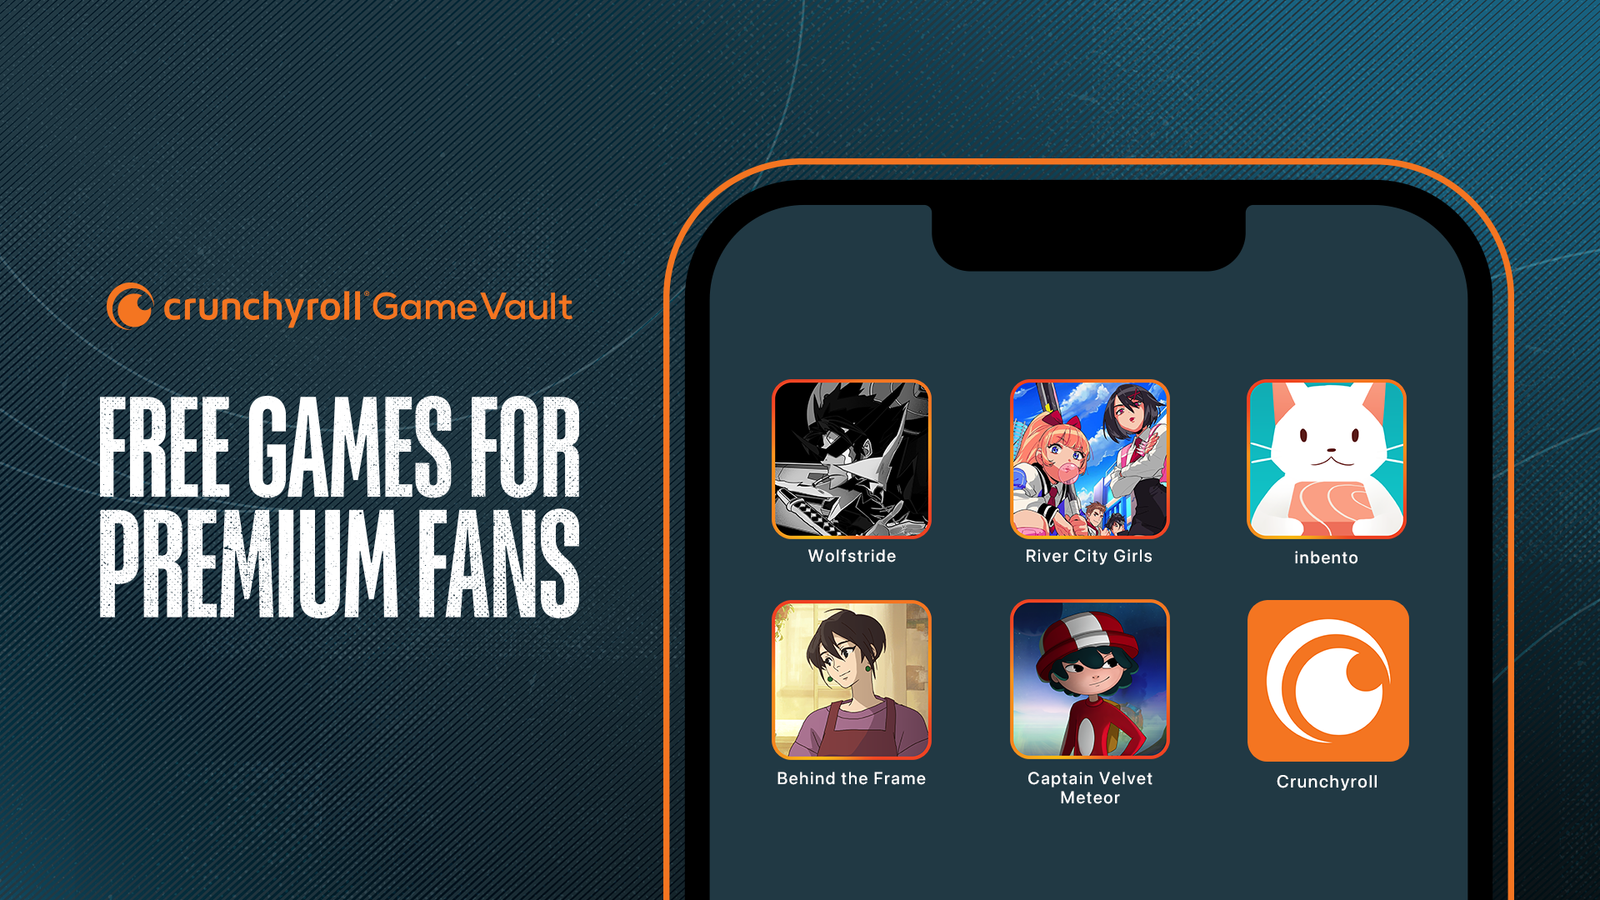 Crunchyroll Debuts Brand-New Crunchyroll Game Vault With 5 Exciting Titles